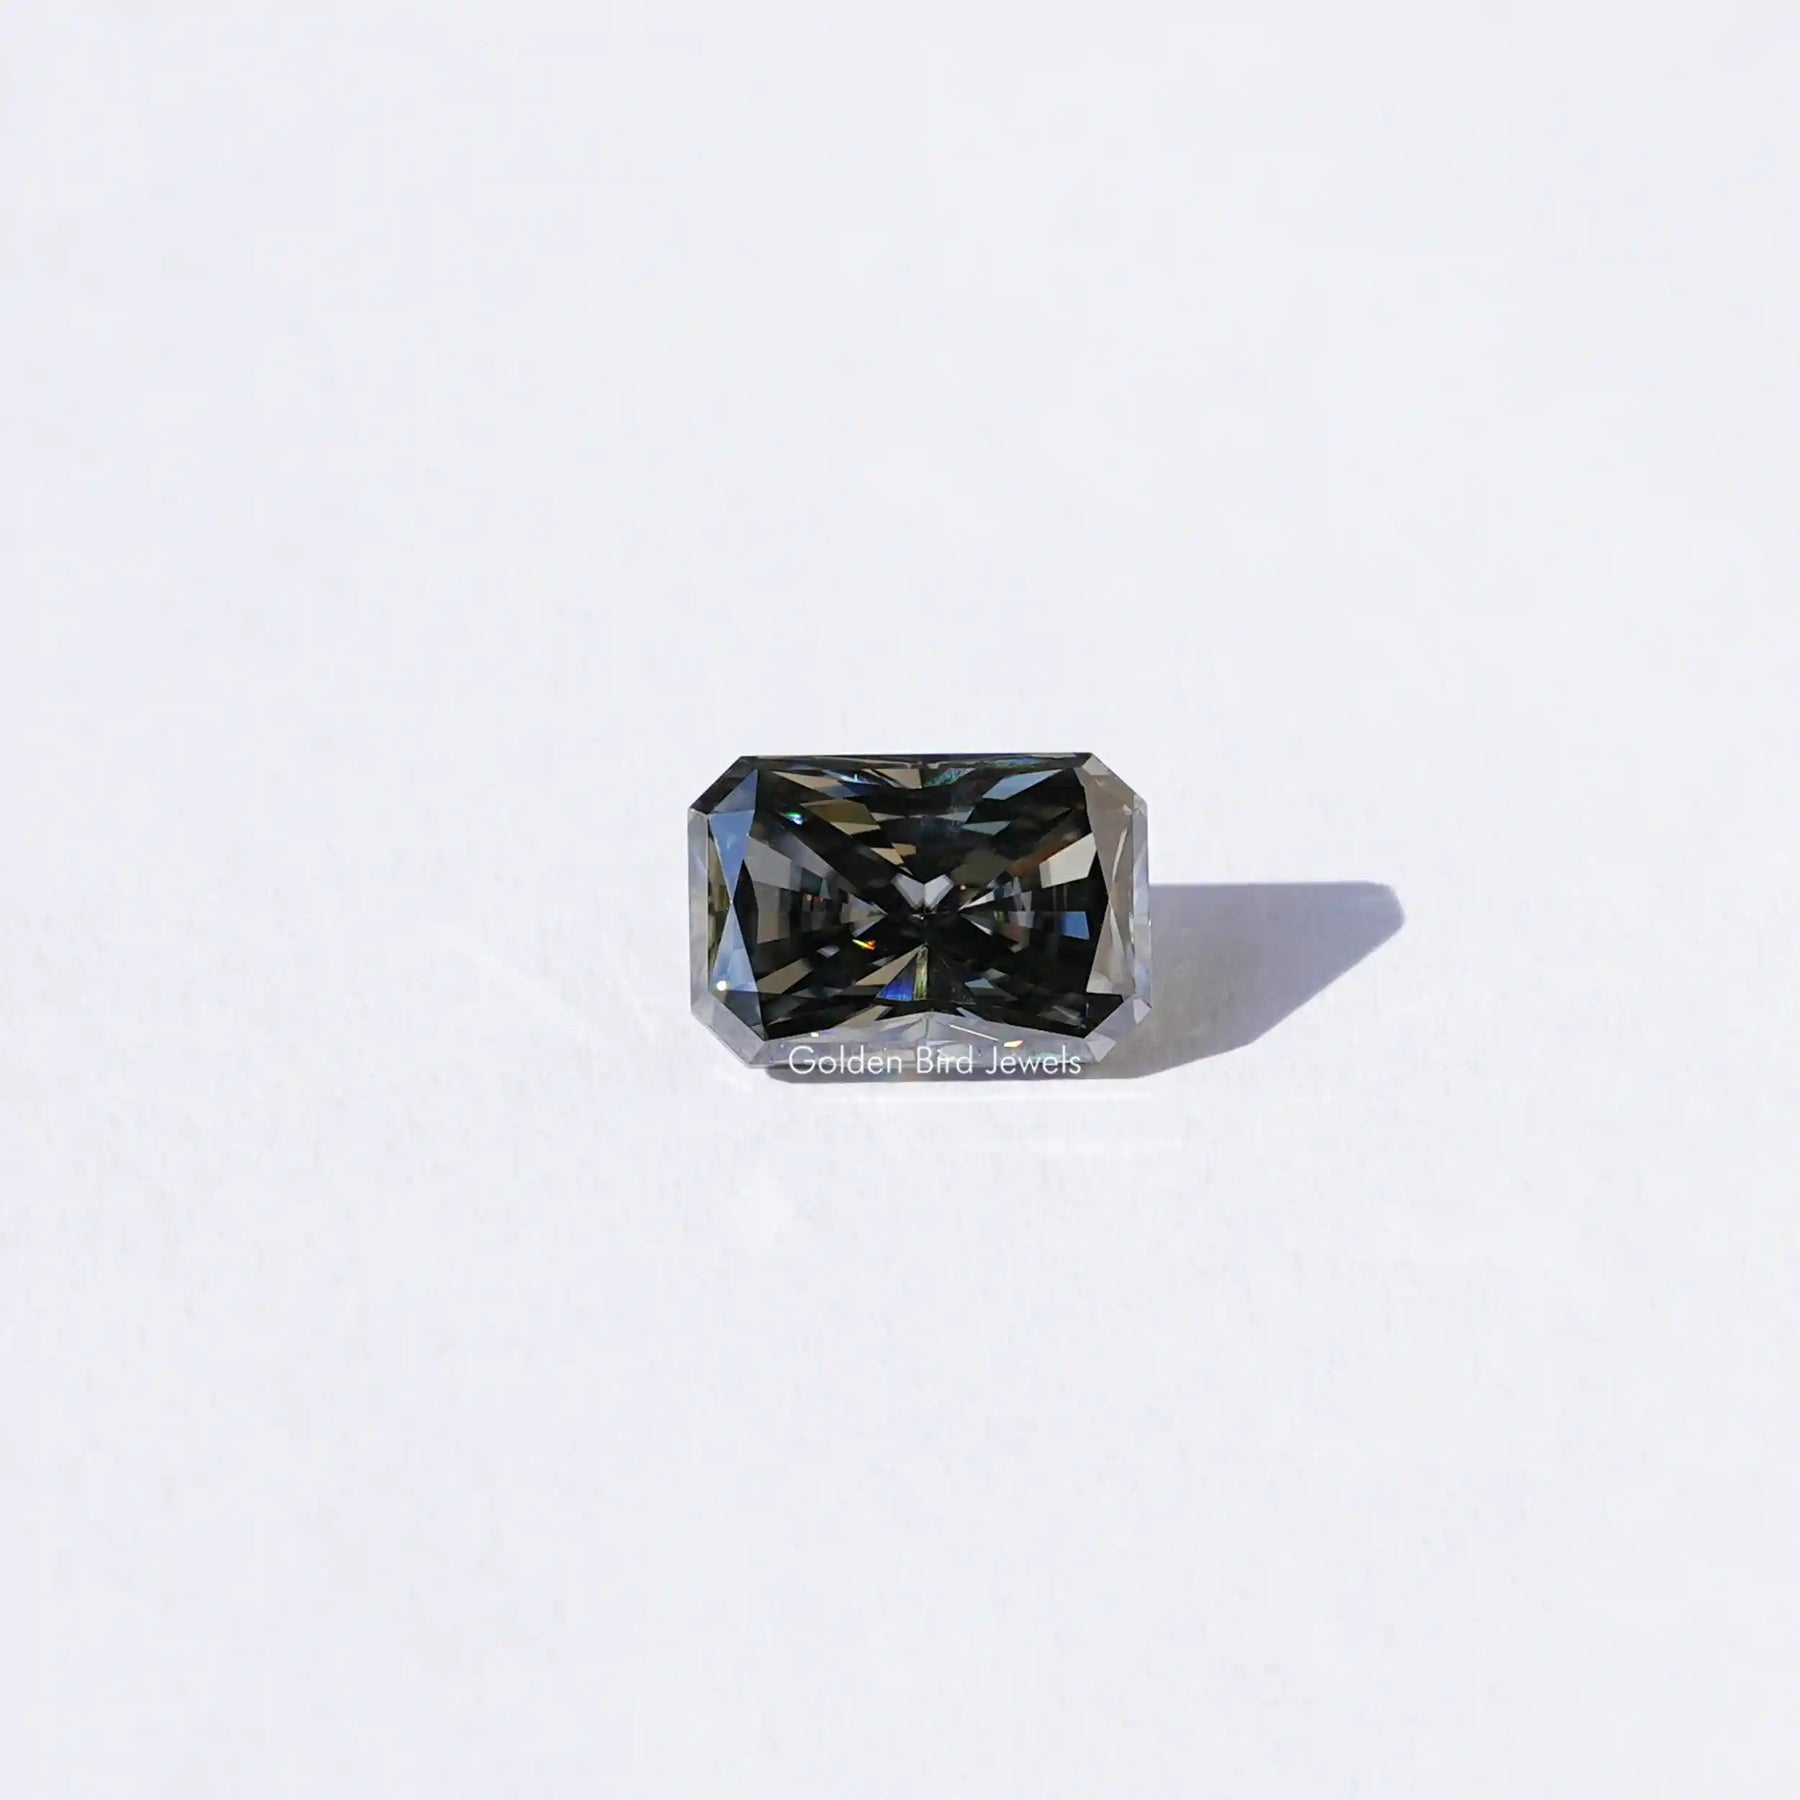 [Front view of gray radiant cut loose moissanite]-[Golden Bird Jewels]